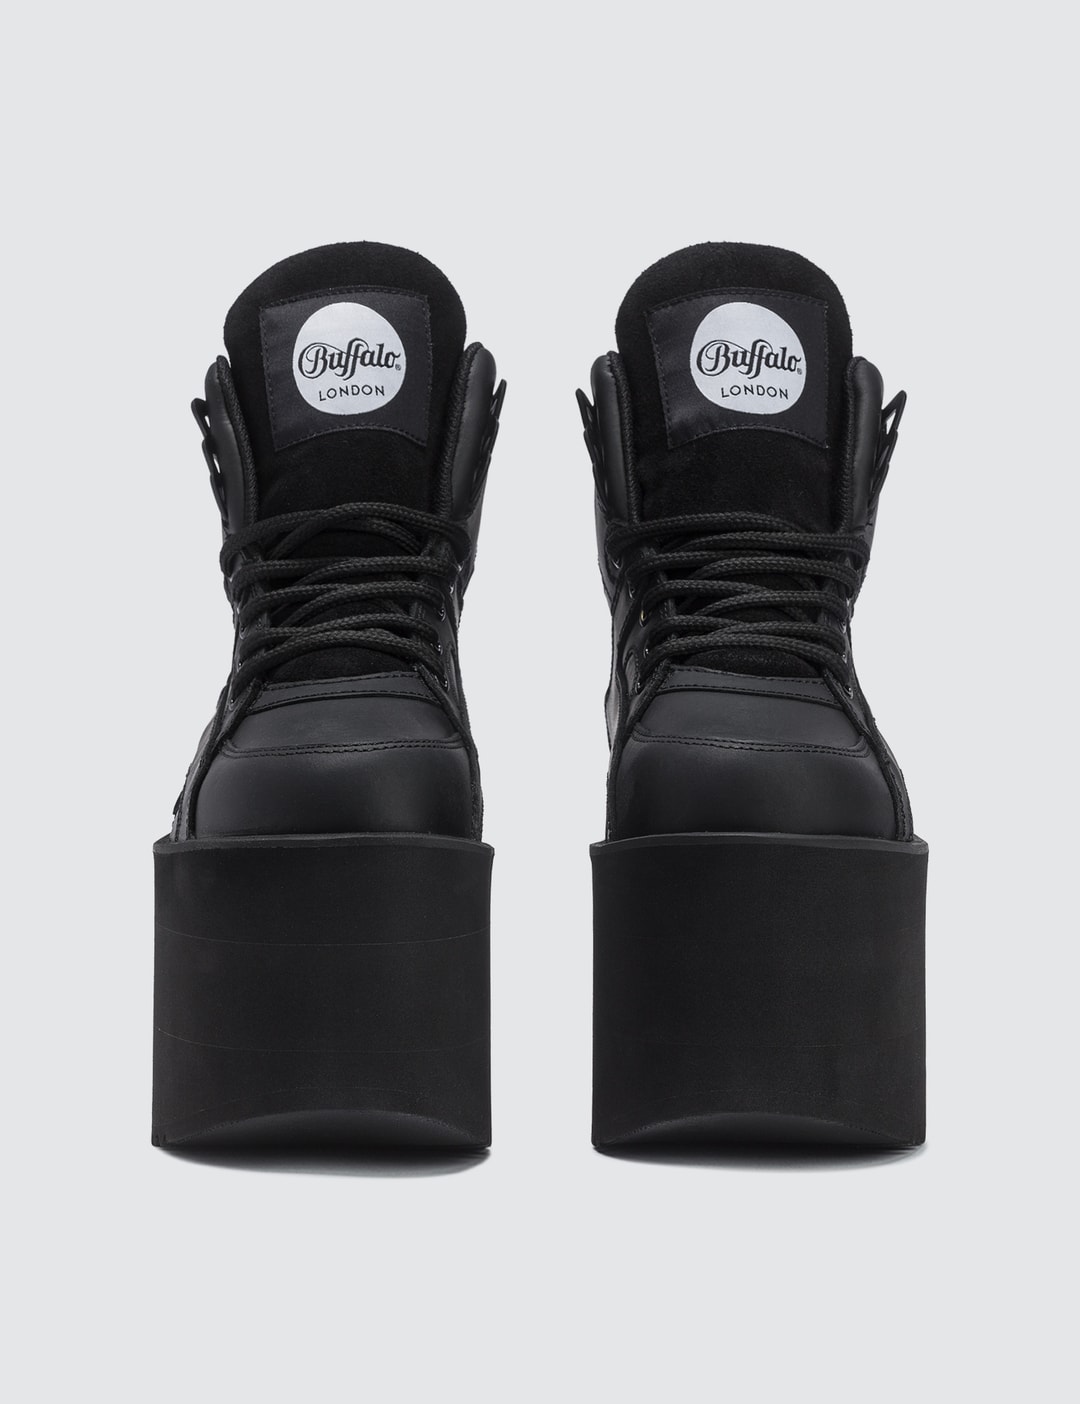 Buffalo London - High Tower Sneakers | HBX - Curated Fashion and Lifestyle by Hypebeast